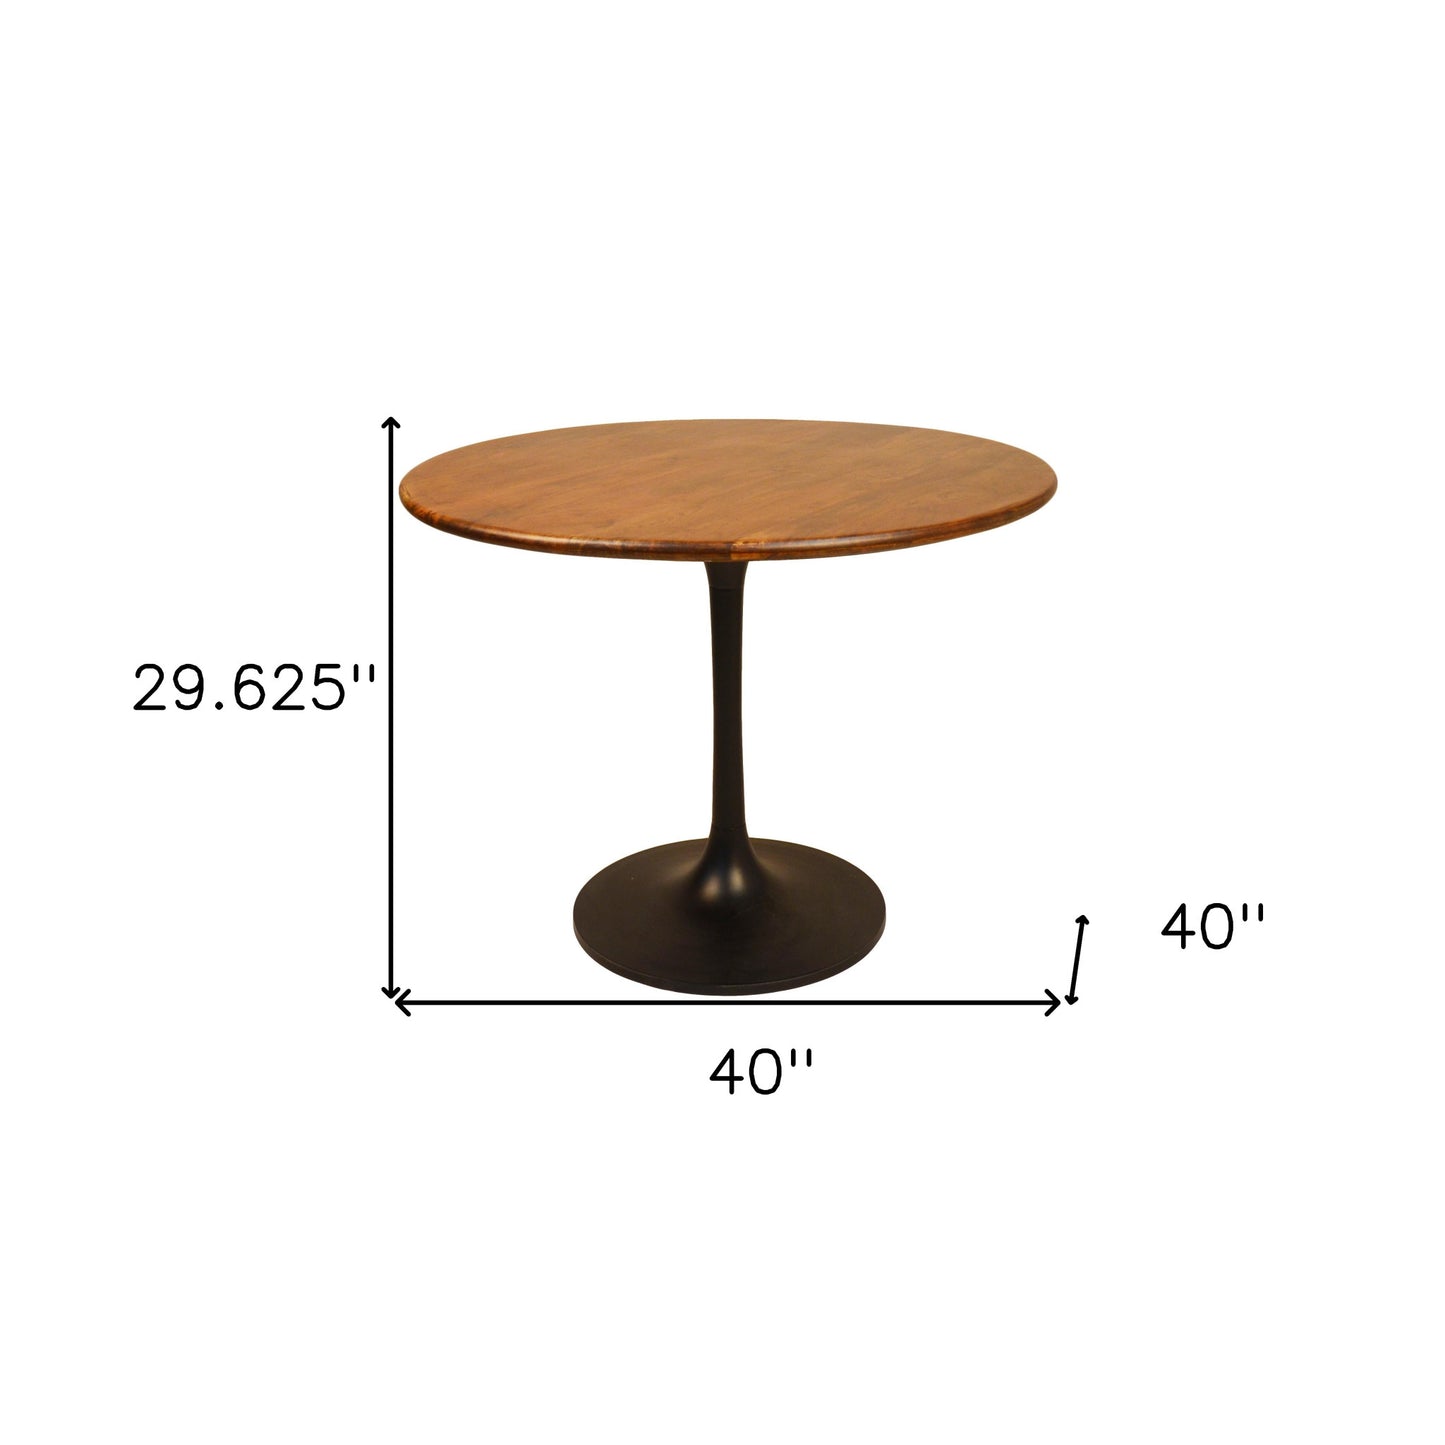 40" Brown and Black Rounded Solid Wood and Iron Pedestal Base Dining Table